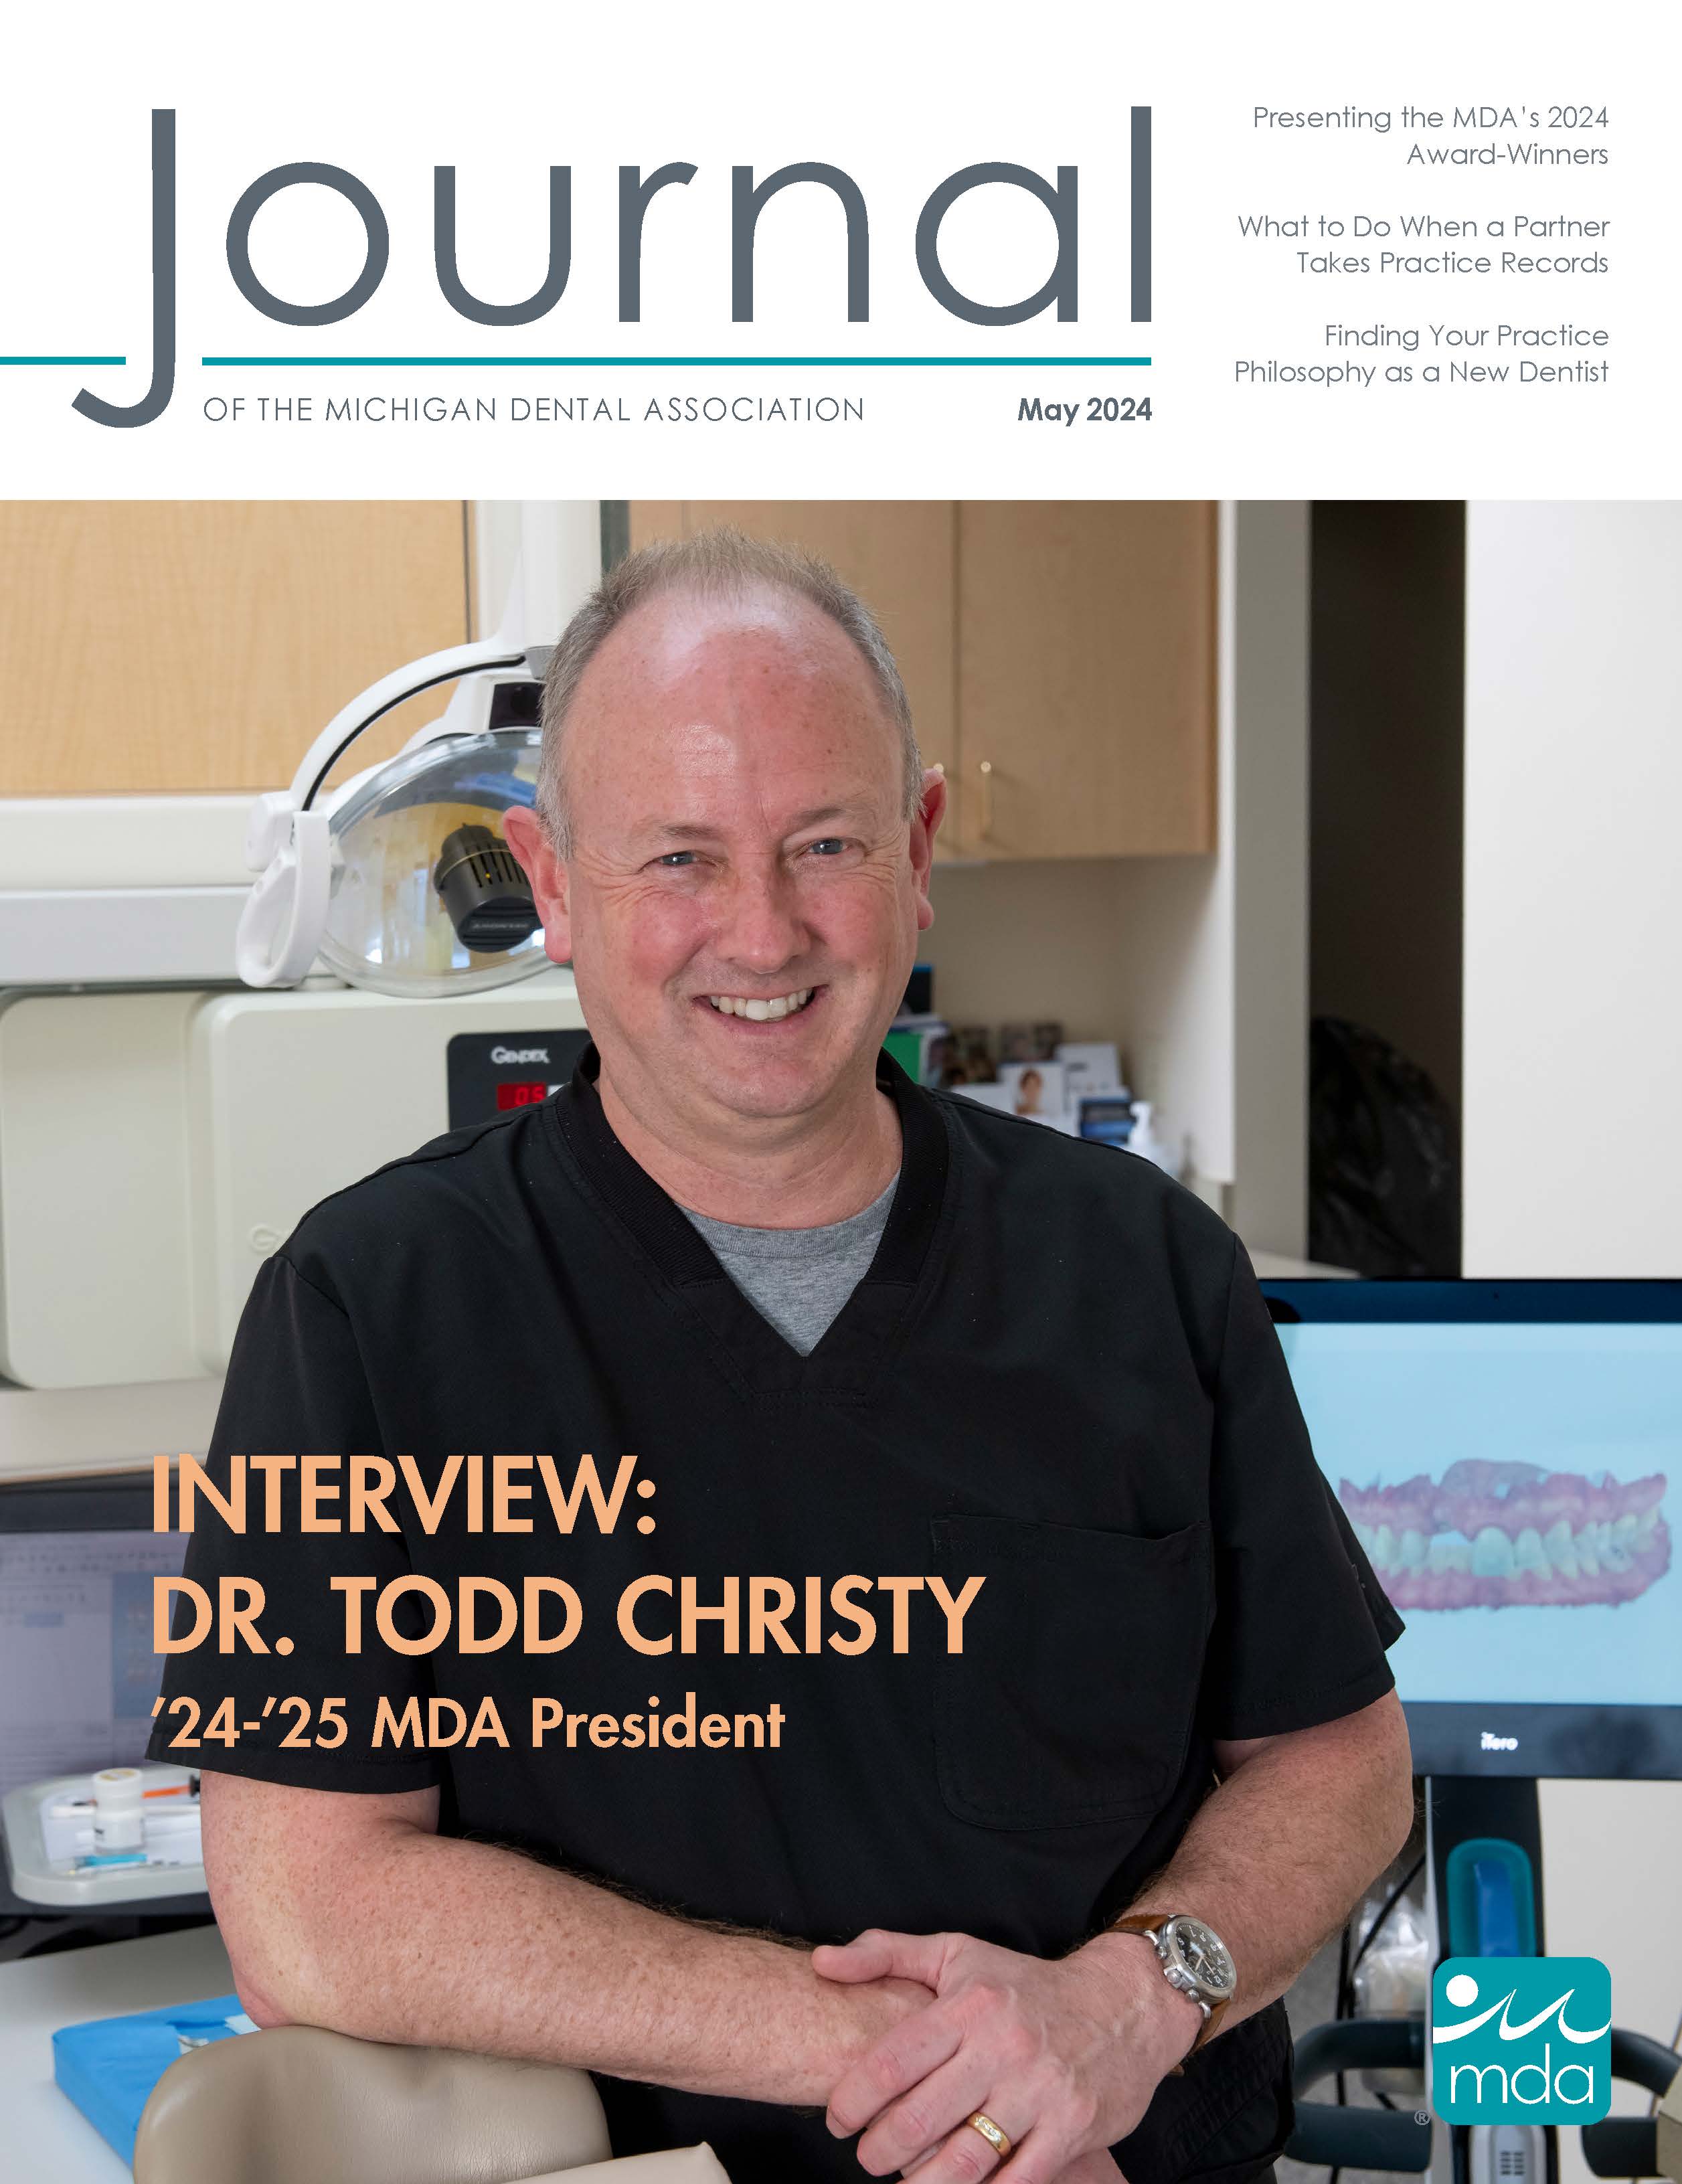 Cover of the Journal of the Michigan Dental Association with a photo of MDA President Dr. Todd Christy sitting in a dental exam chair.